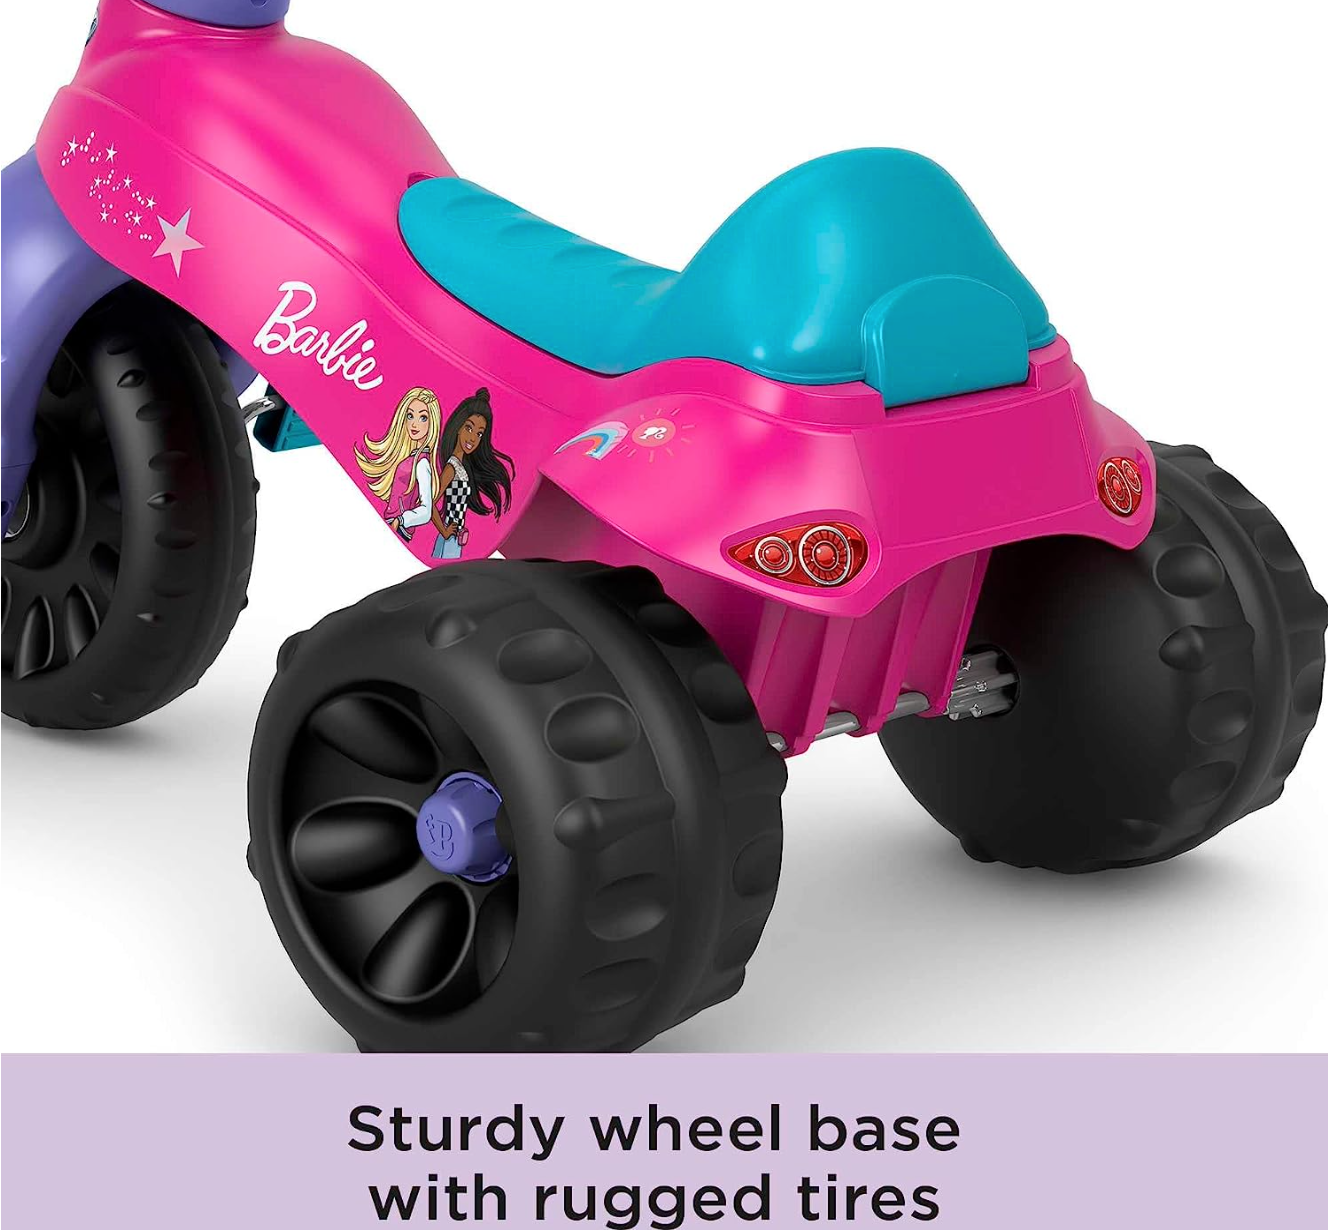 Fisher-Price Barbie Tricycle with Handlebar Grips and Storage Area, Multi-Terrain Tires, Tough Trike Large